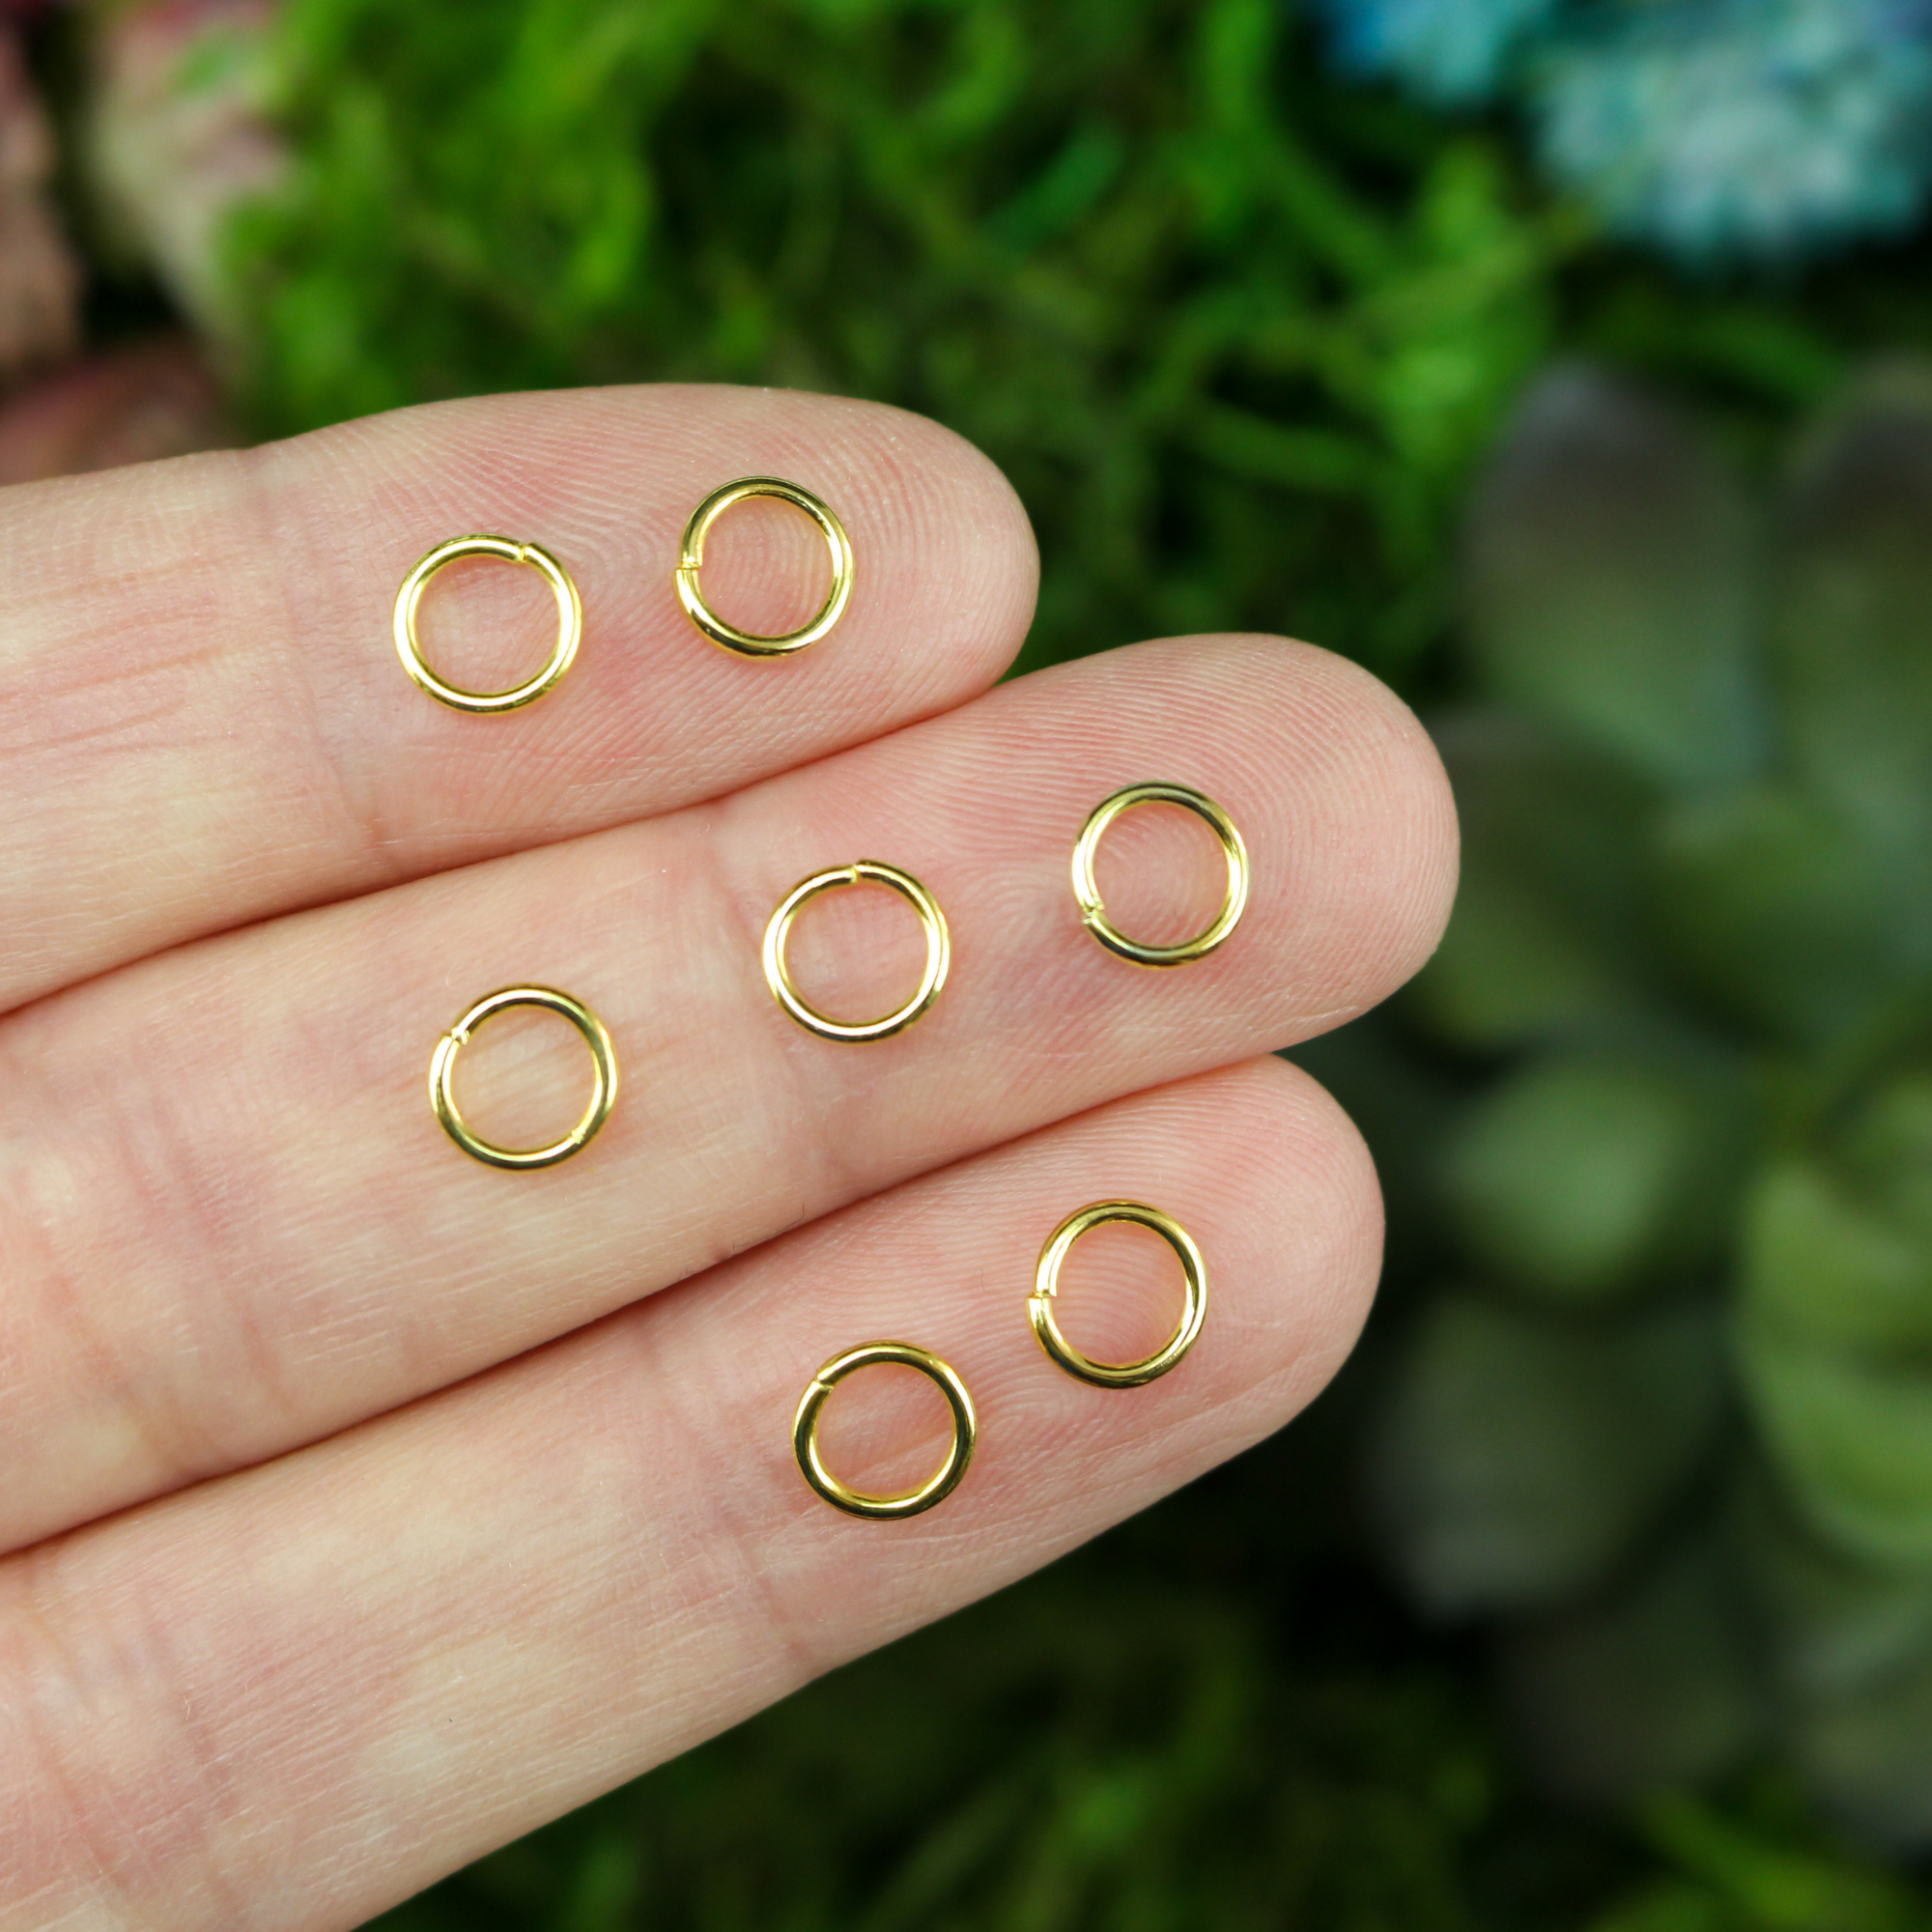 6mm round gold plated jump rings sold in packs of 100 pieces